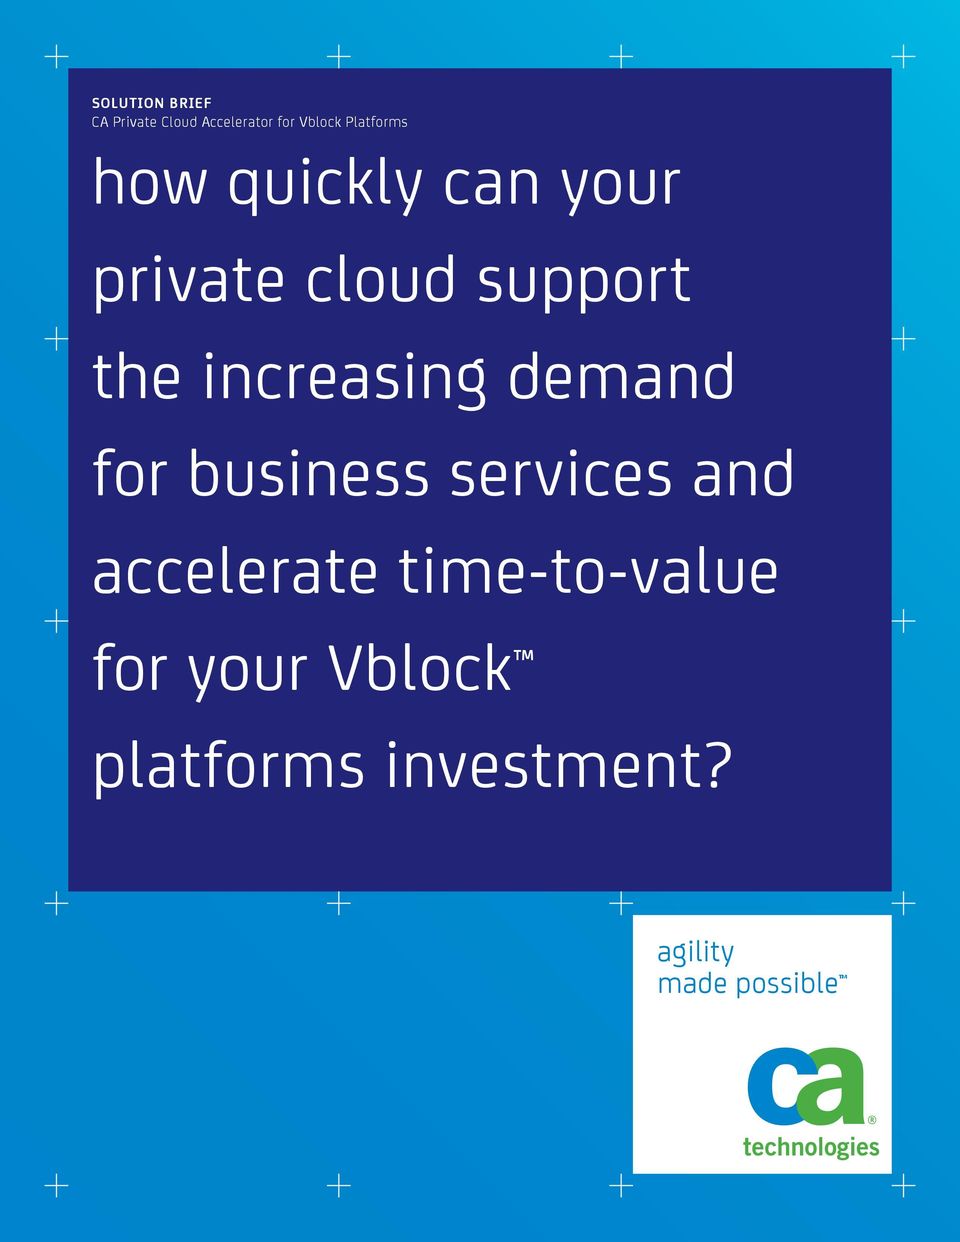 increasing demand for business services and accelerate